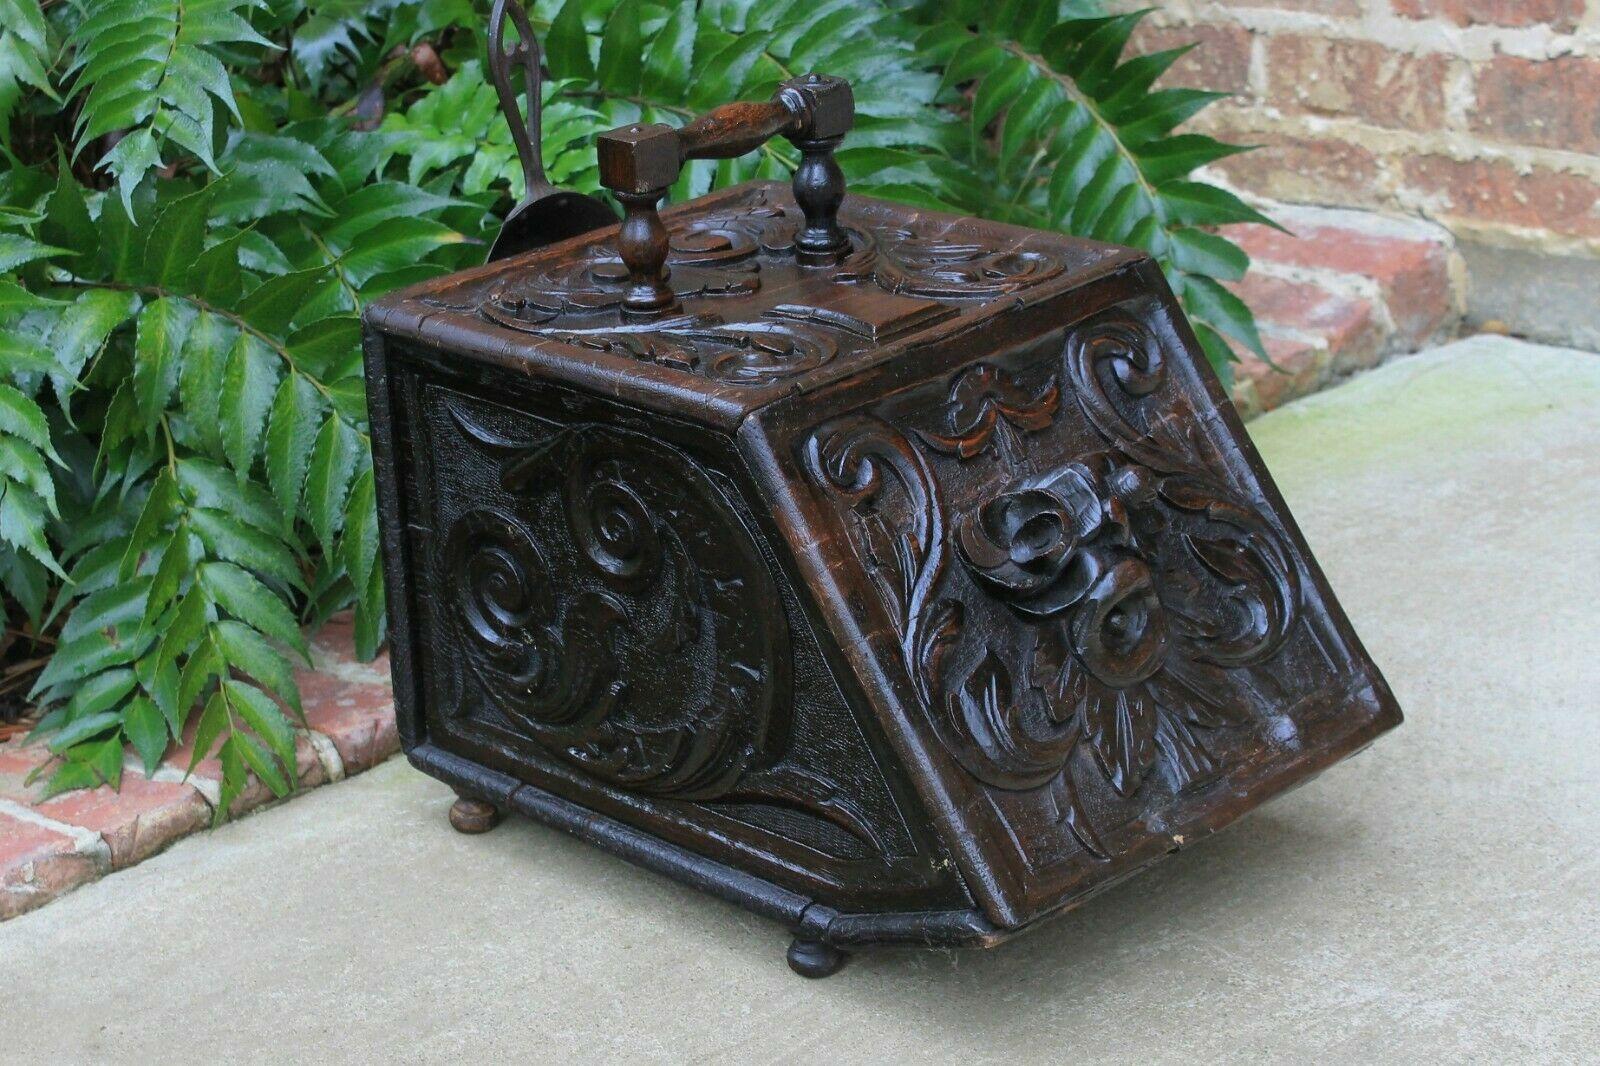 Antique English oak hand carved oak lift top coal hod Scuttle~~c. 1880s-1890s

Ornately carved foliage, berries and scroll work~~carved on all sides

Slant top with carved handle, original tin liner and brass shovel~~traditional old world